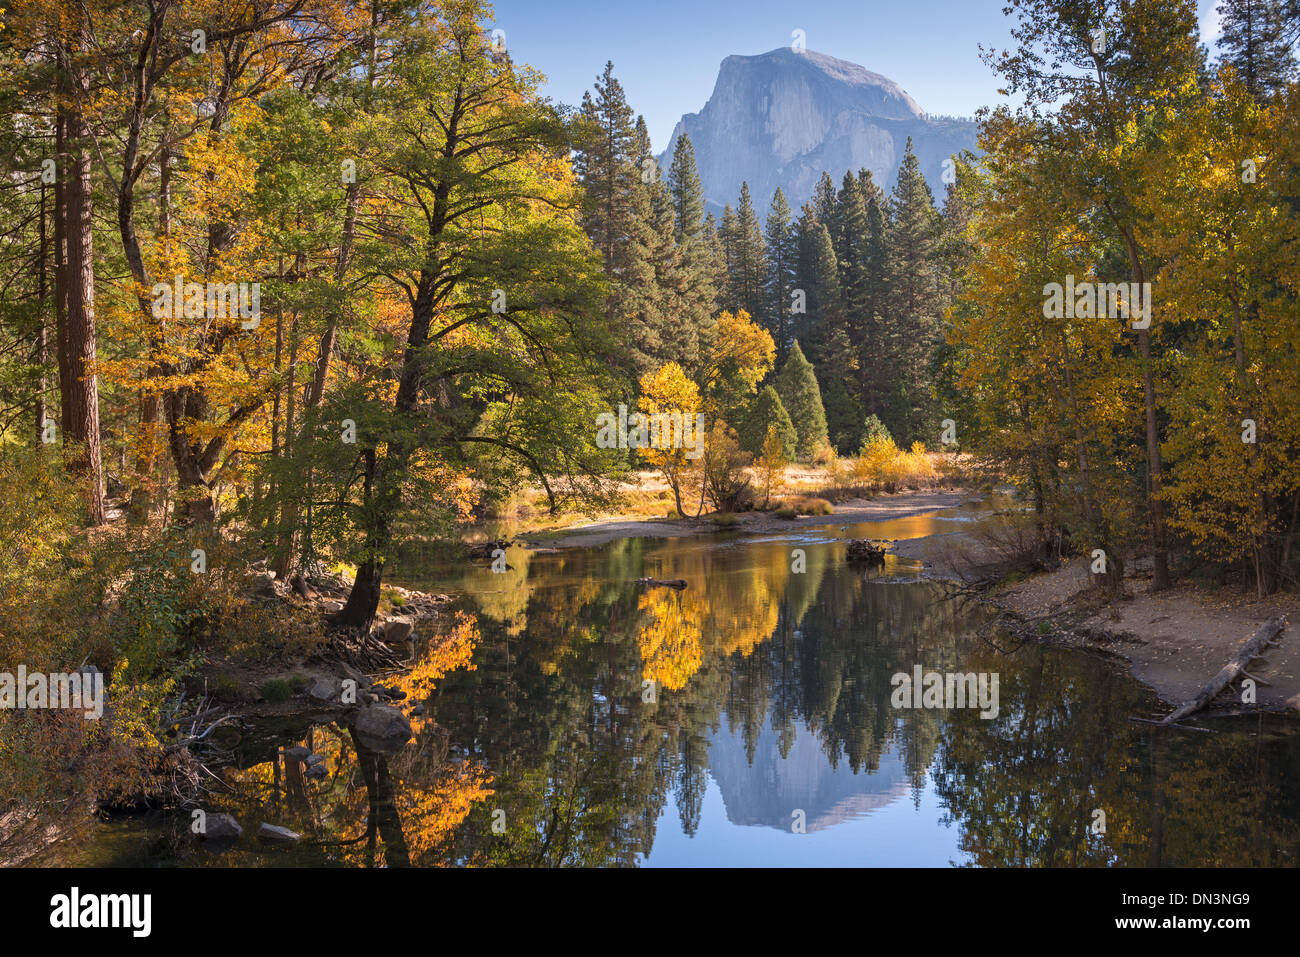 Half Dome and fall foliage reflected in the Merced River, Yosemite Valley, California, USA. Autumn (October) 2013. Stock Photo